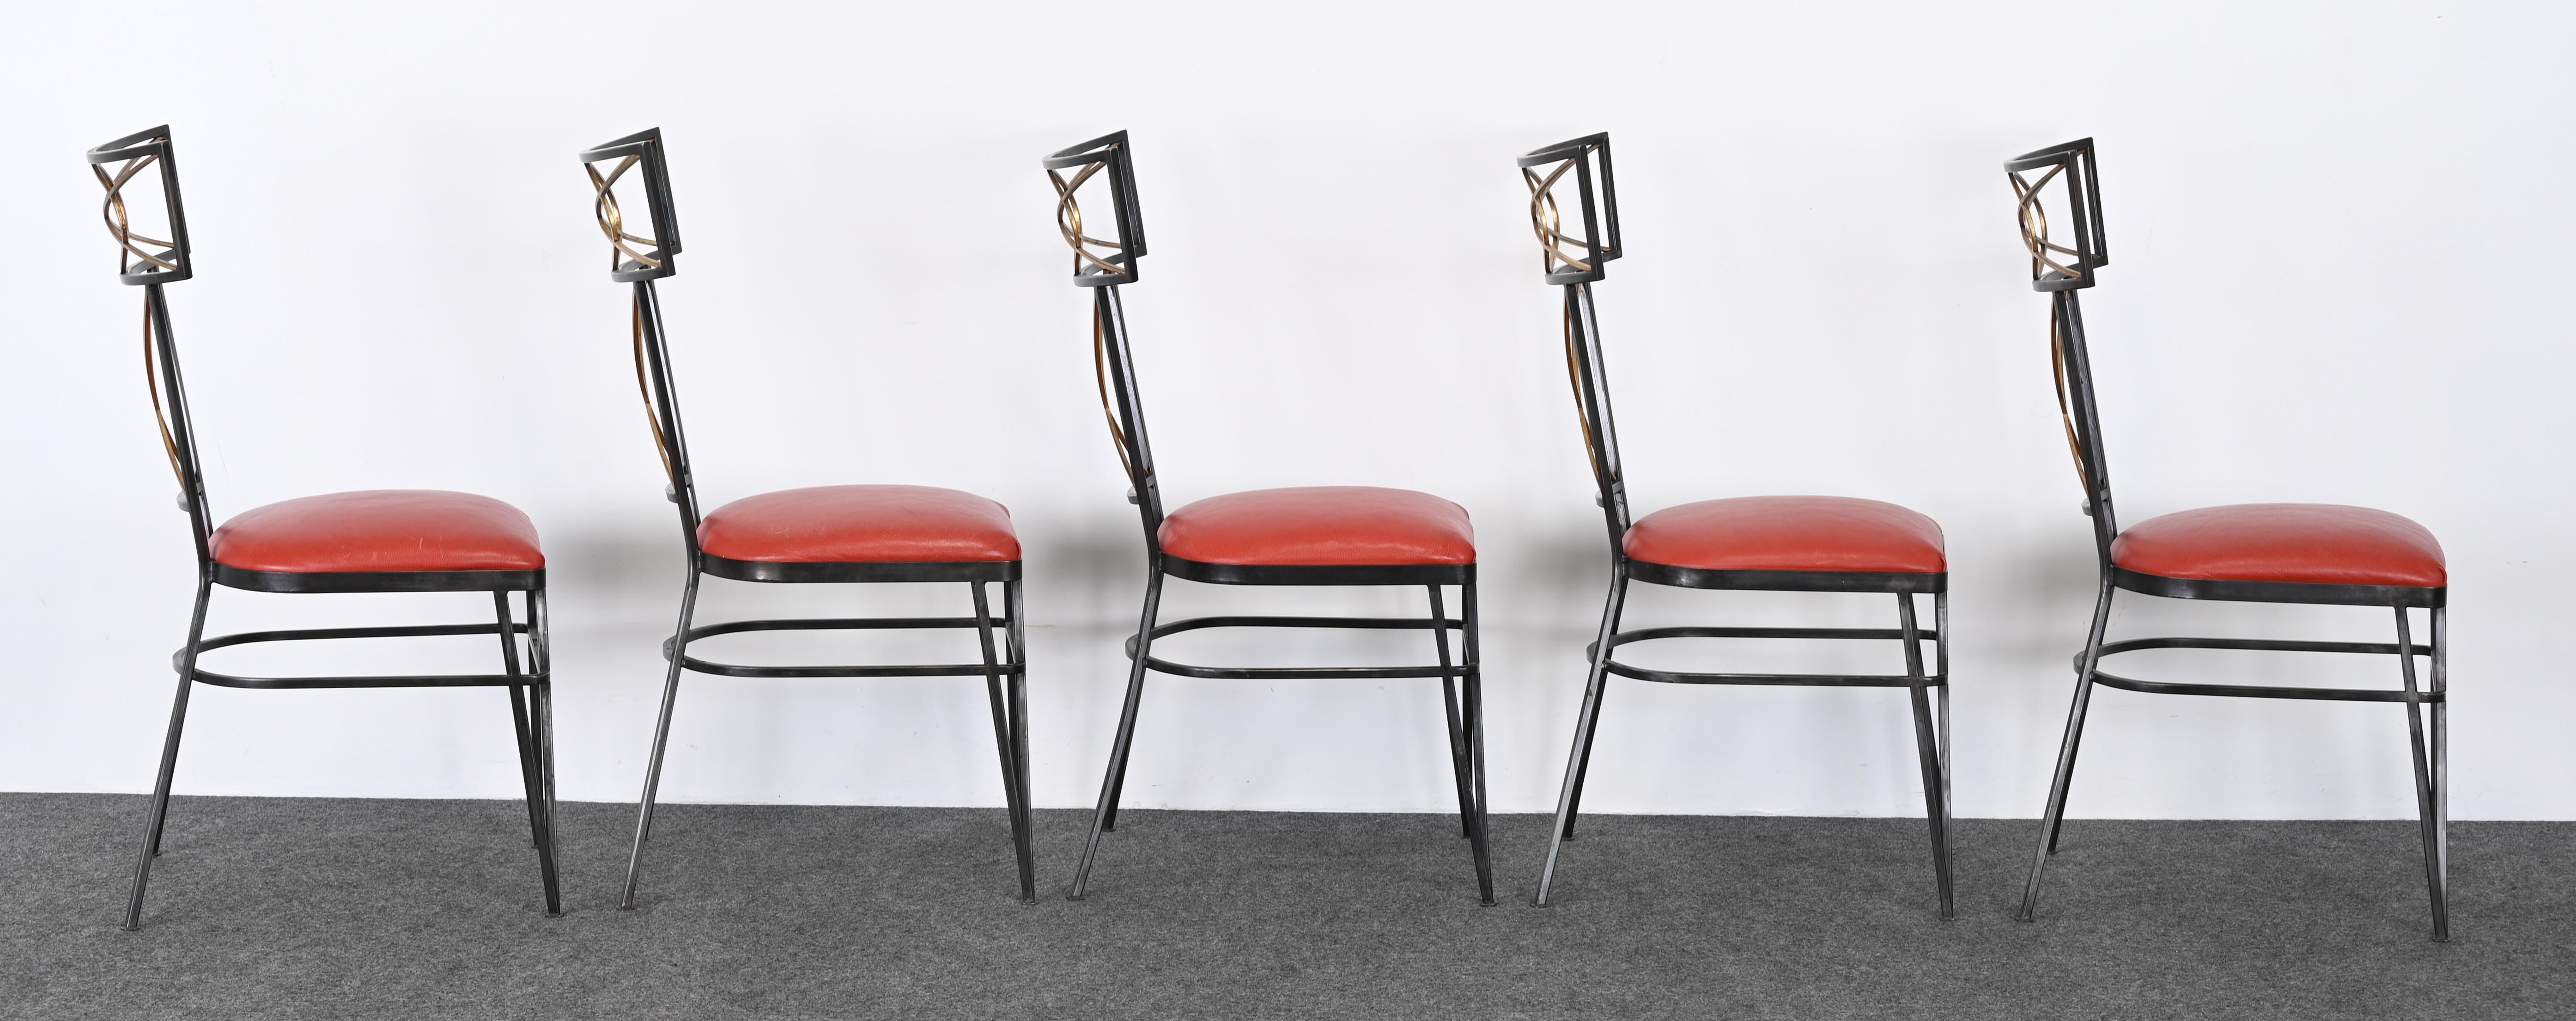 Set of Ten Steel and Gold Gilt Neoclassical Chairs, 20th Century For Sale 7